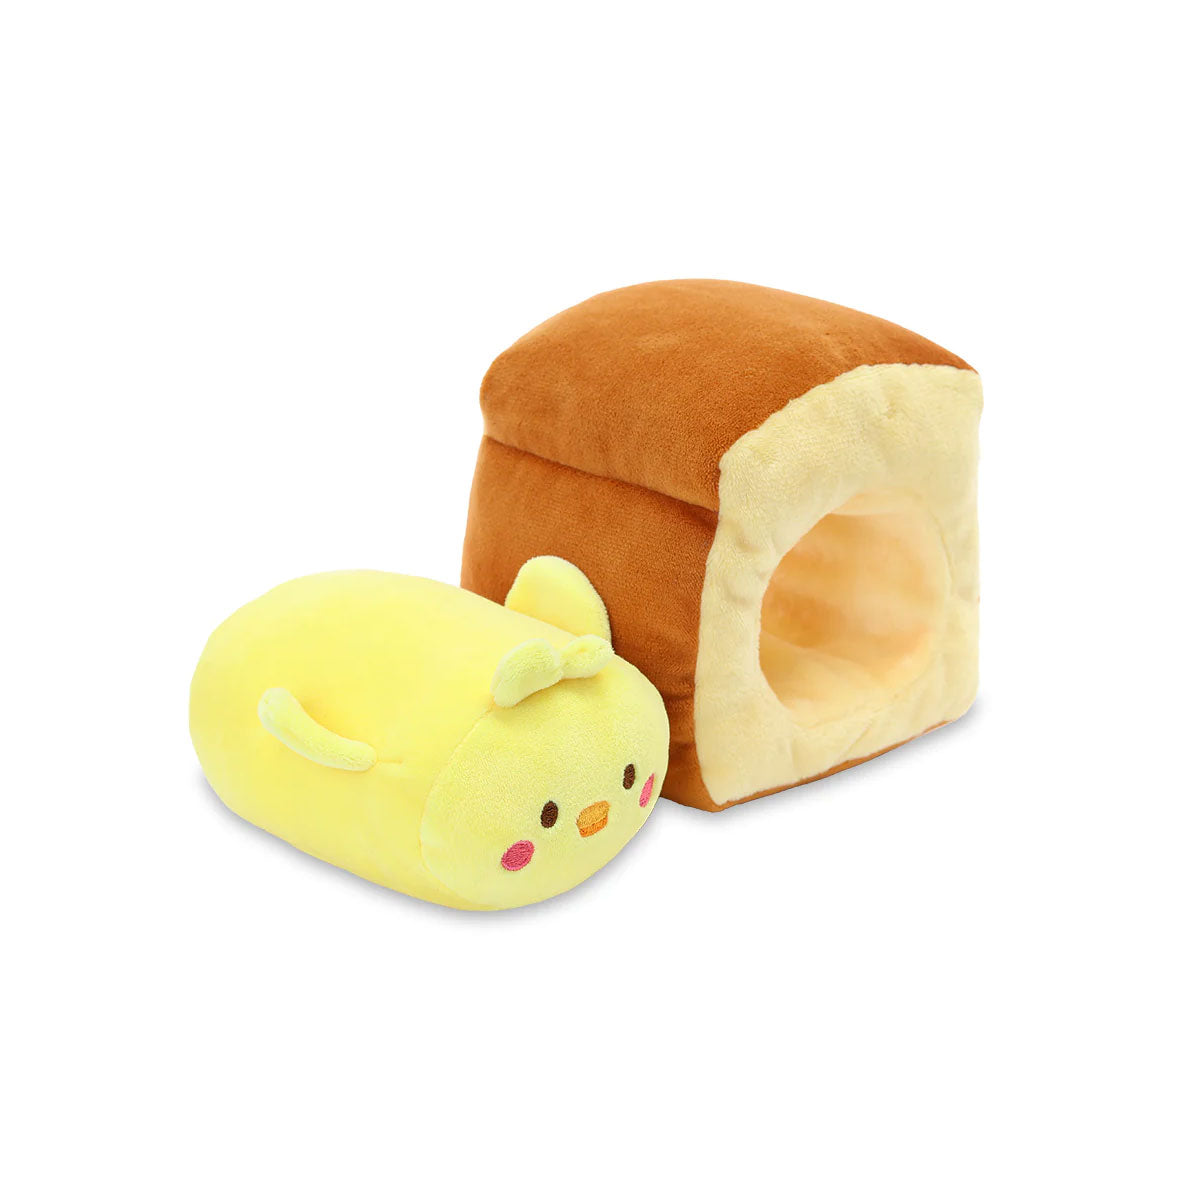 Anirollz Small Baked Goods 6” Blanket Plush - Chickiroll in loaf of bread